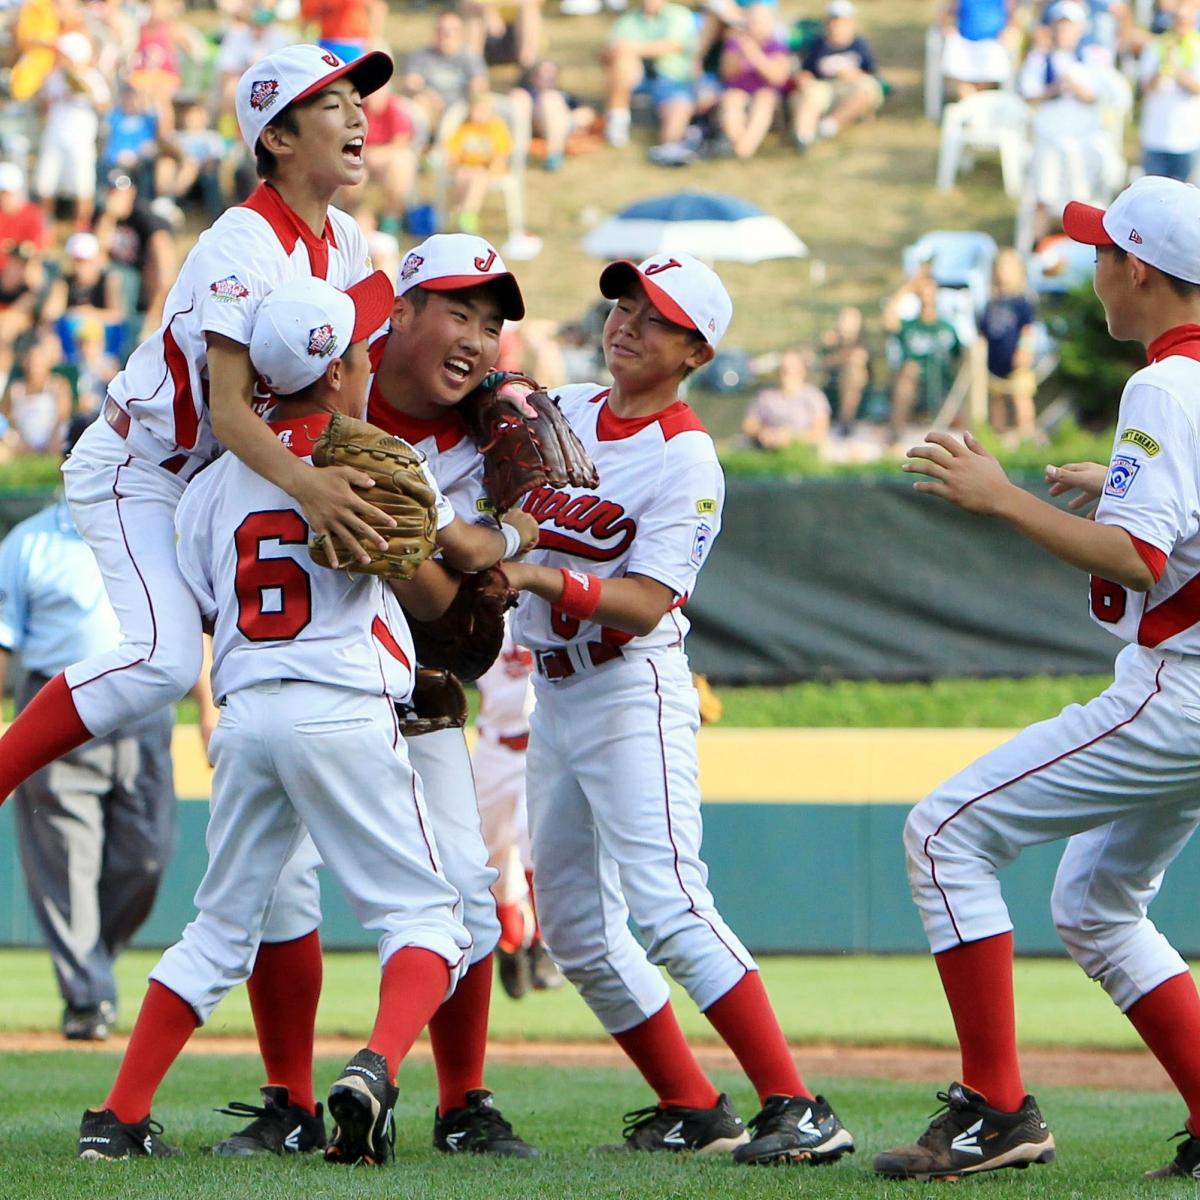 LLWS 2014: Full Schedule and Teams to Watch During Little League